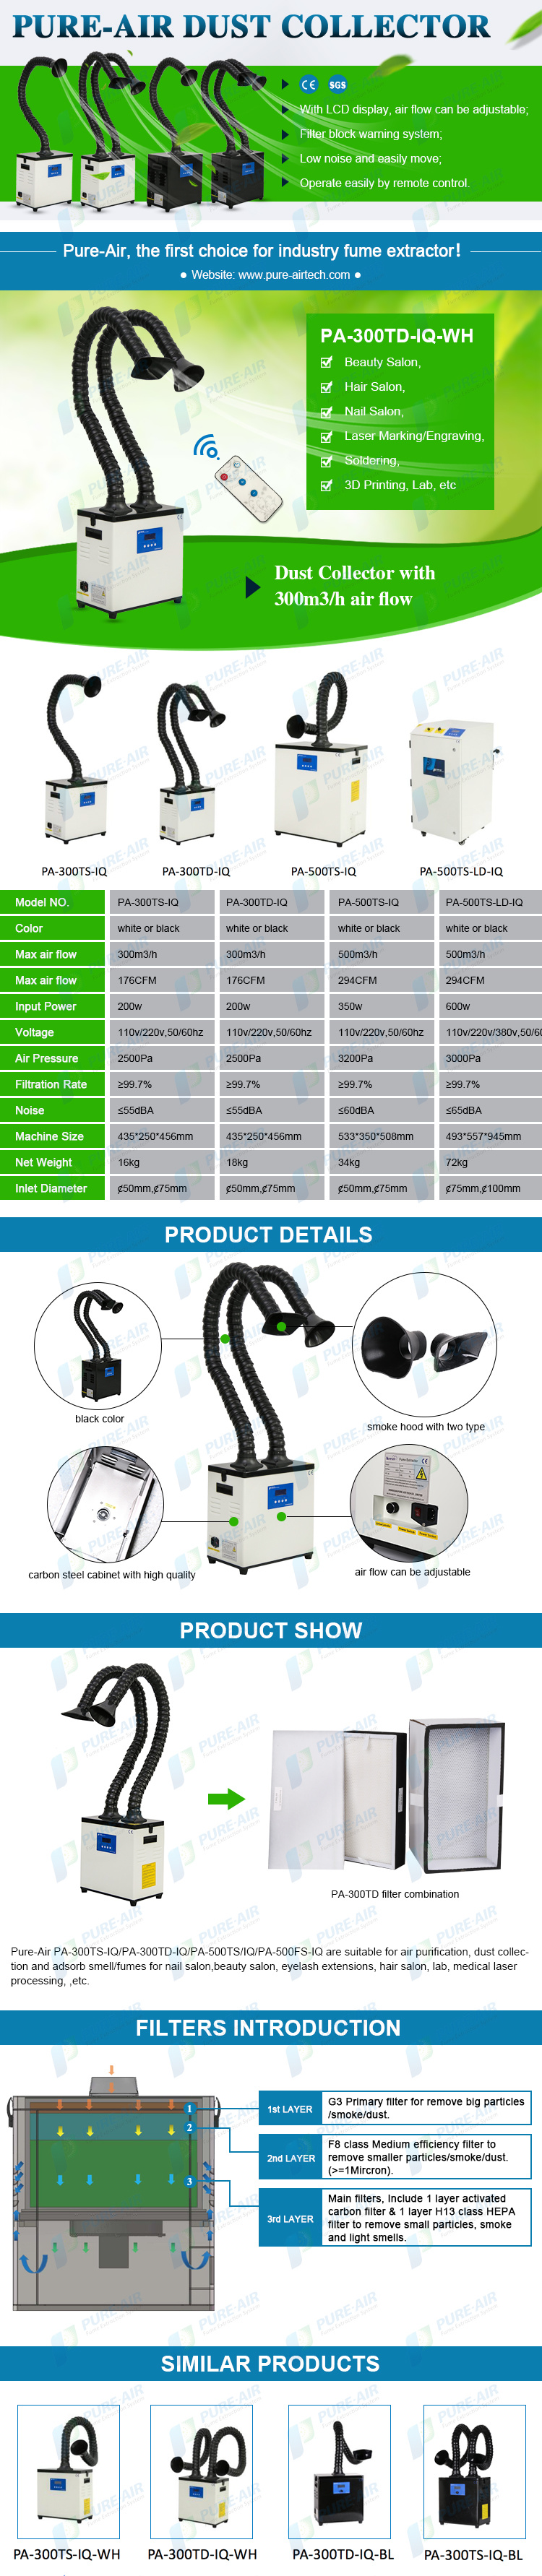 Pure-Air Laser Fume Extractor with HEPA Filter & Activated Carbon Filter